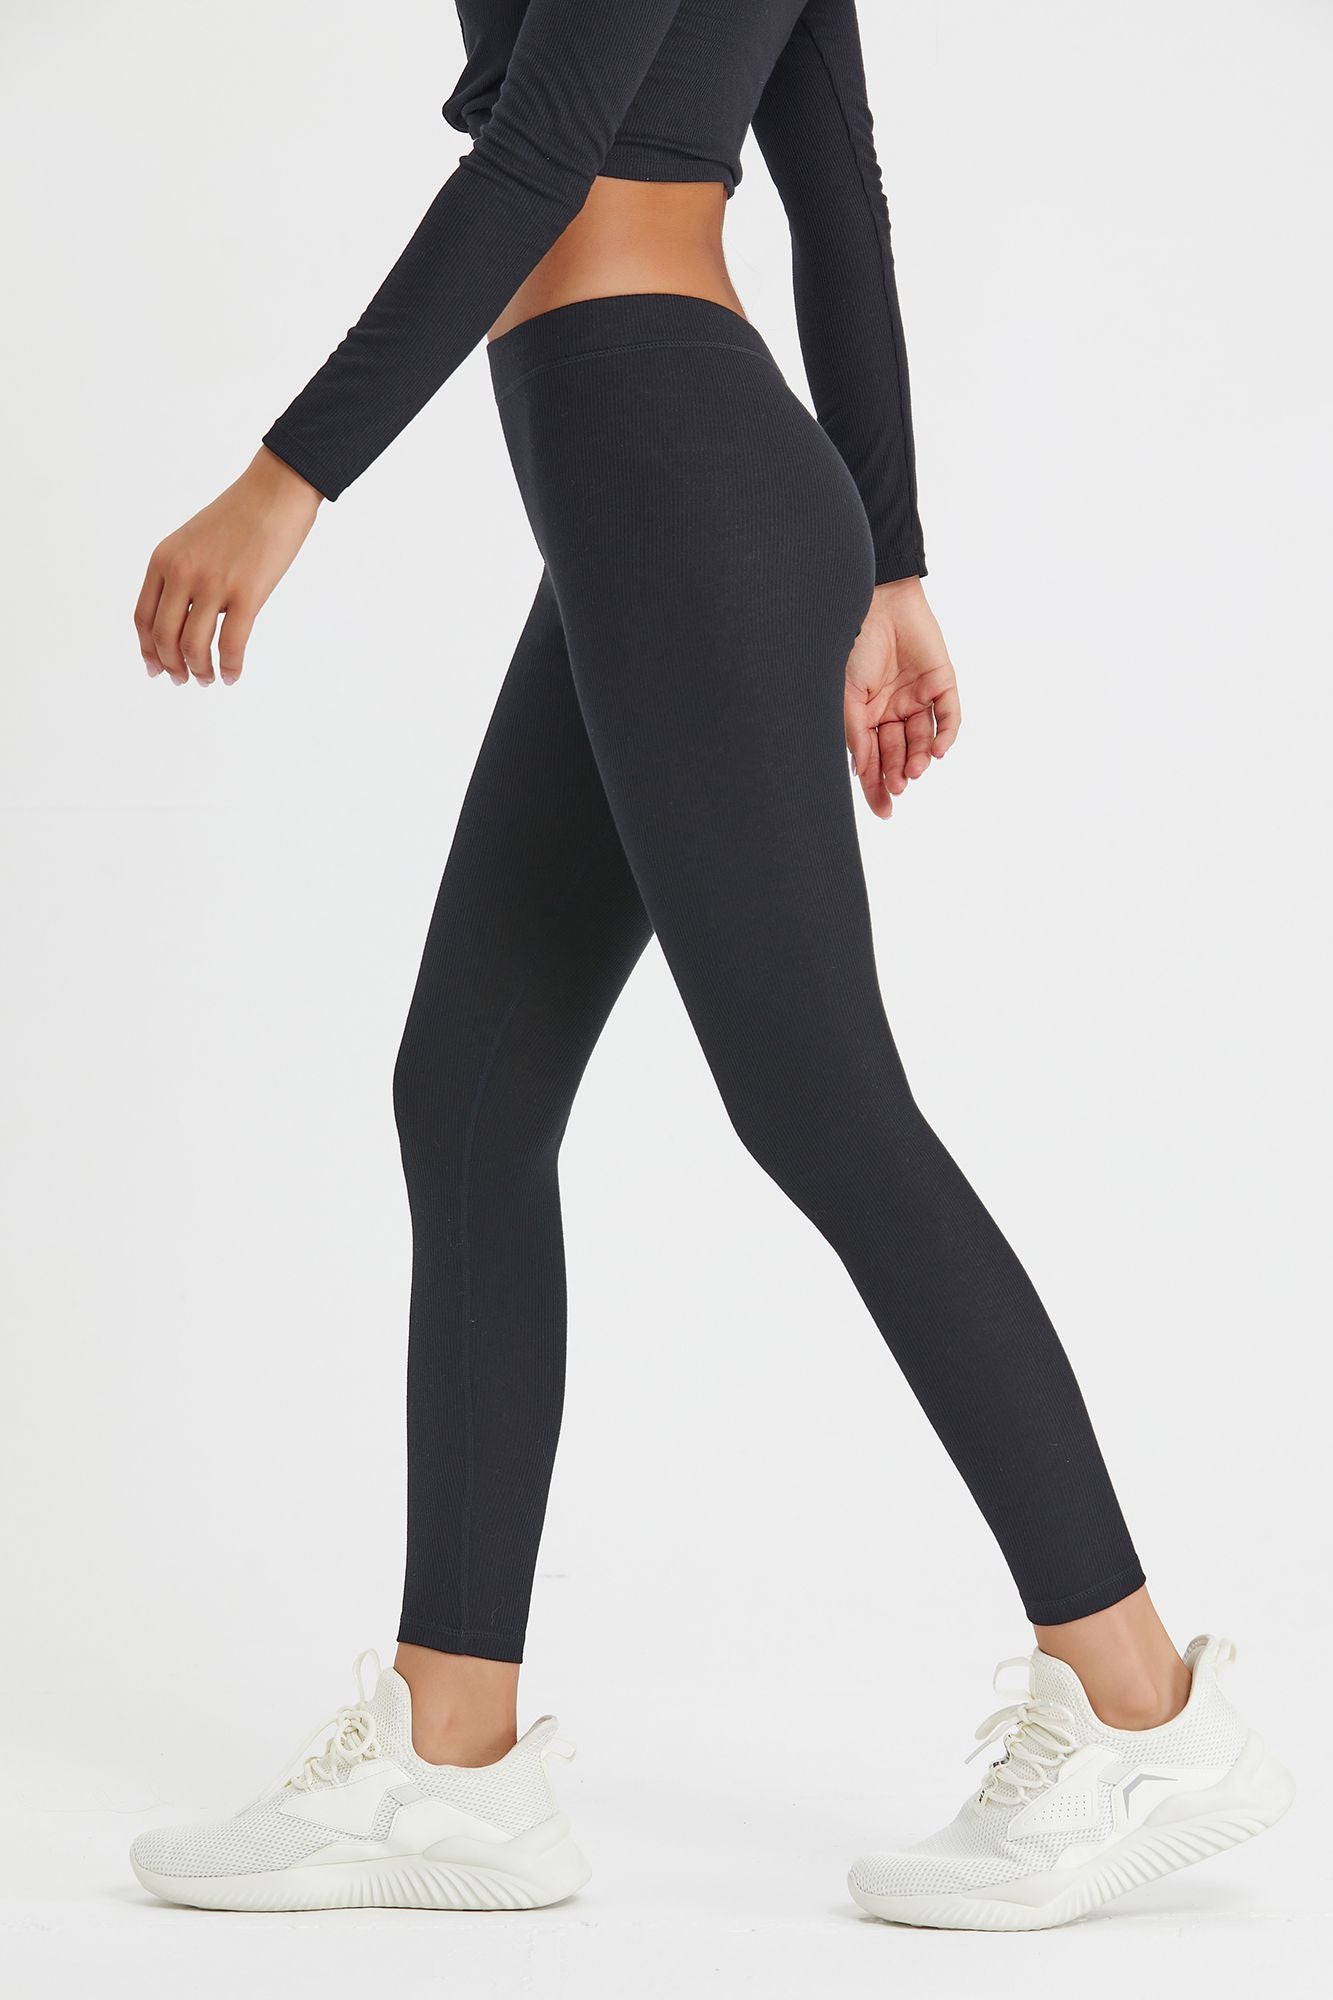 Women's Ribbed Mid-Waist Tummy Control Workout Front Seam Leggings – Zioccie